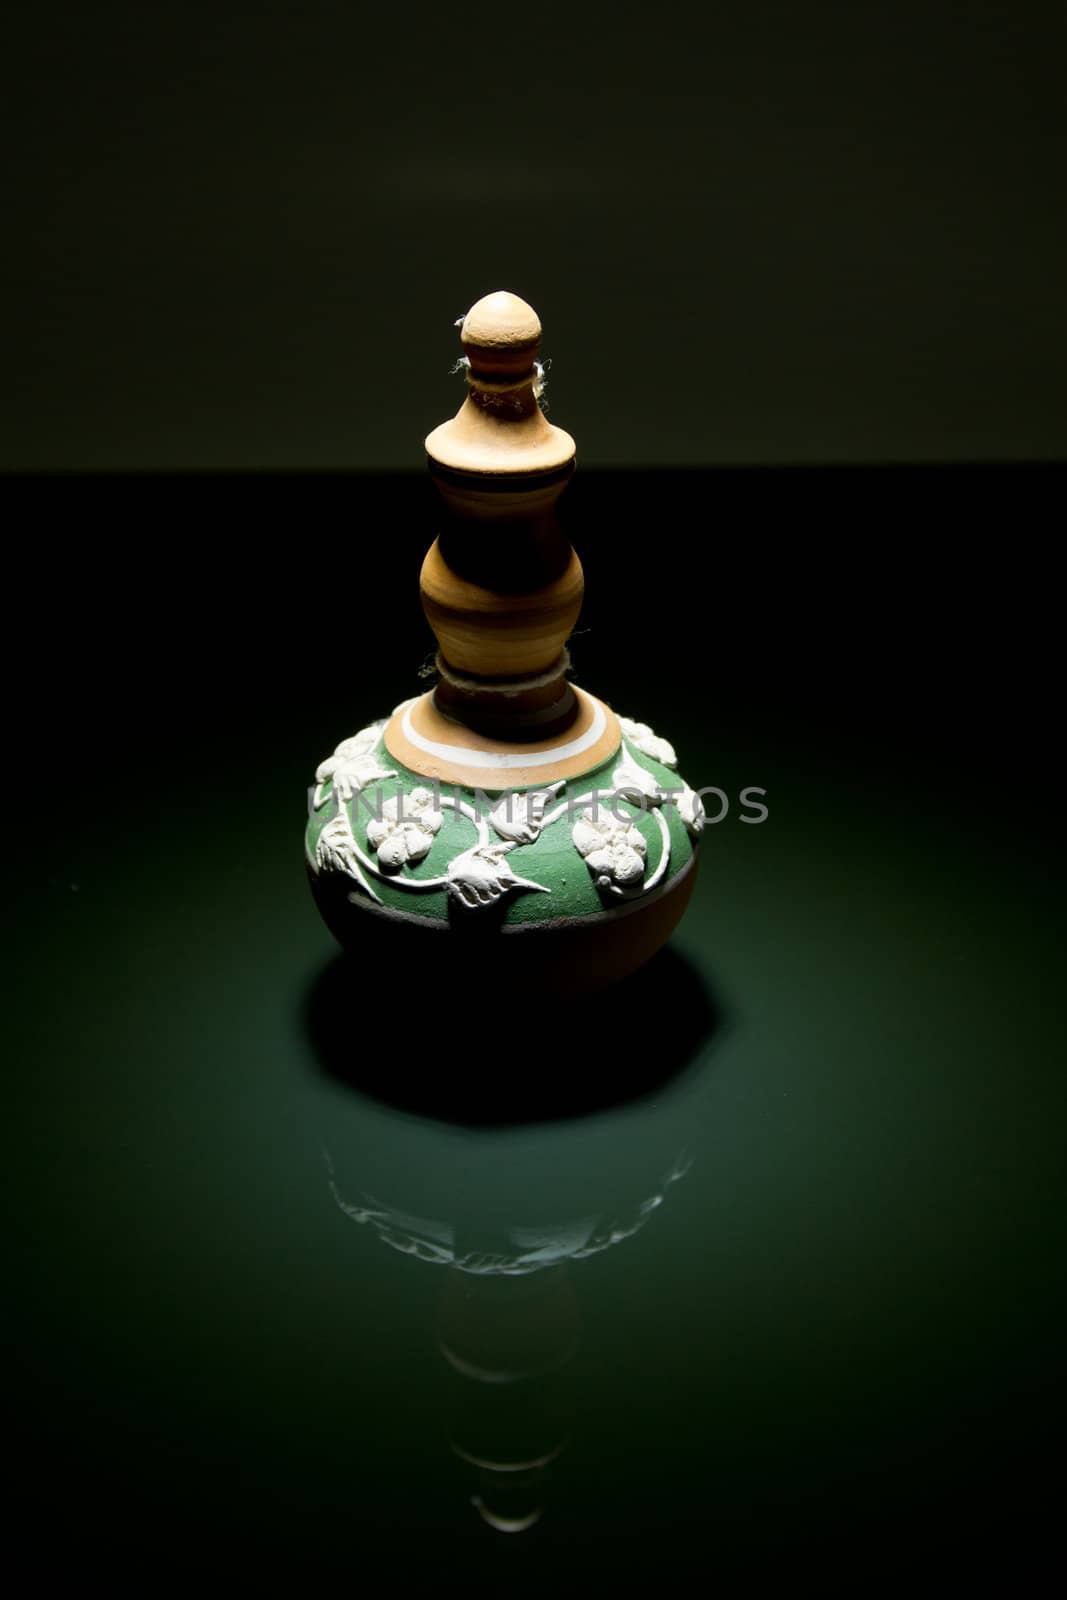 a green clay pottery on a mirror with down-lite and mirror image